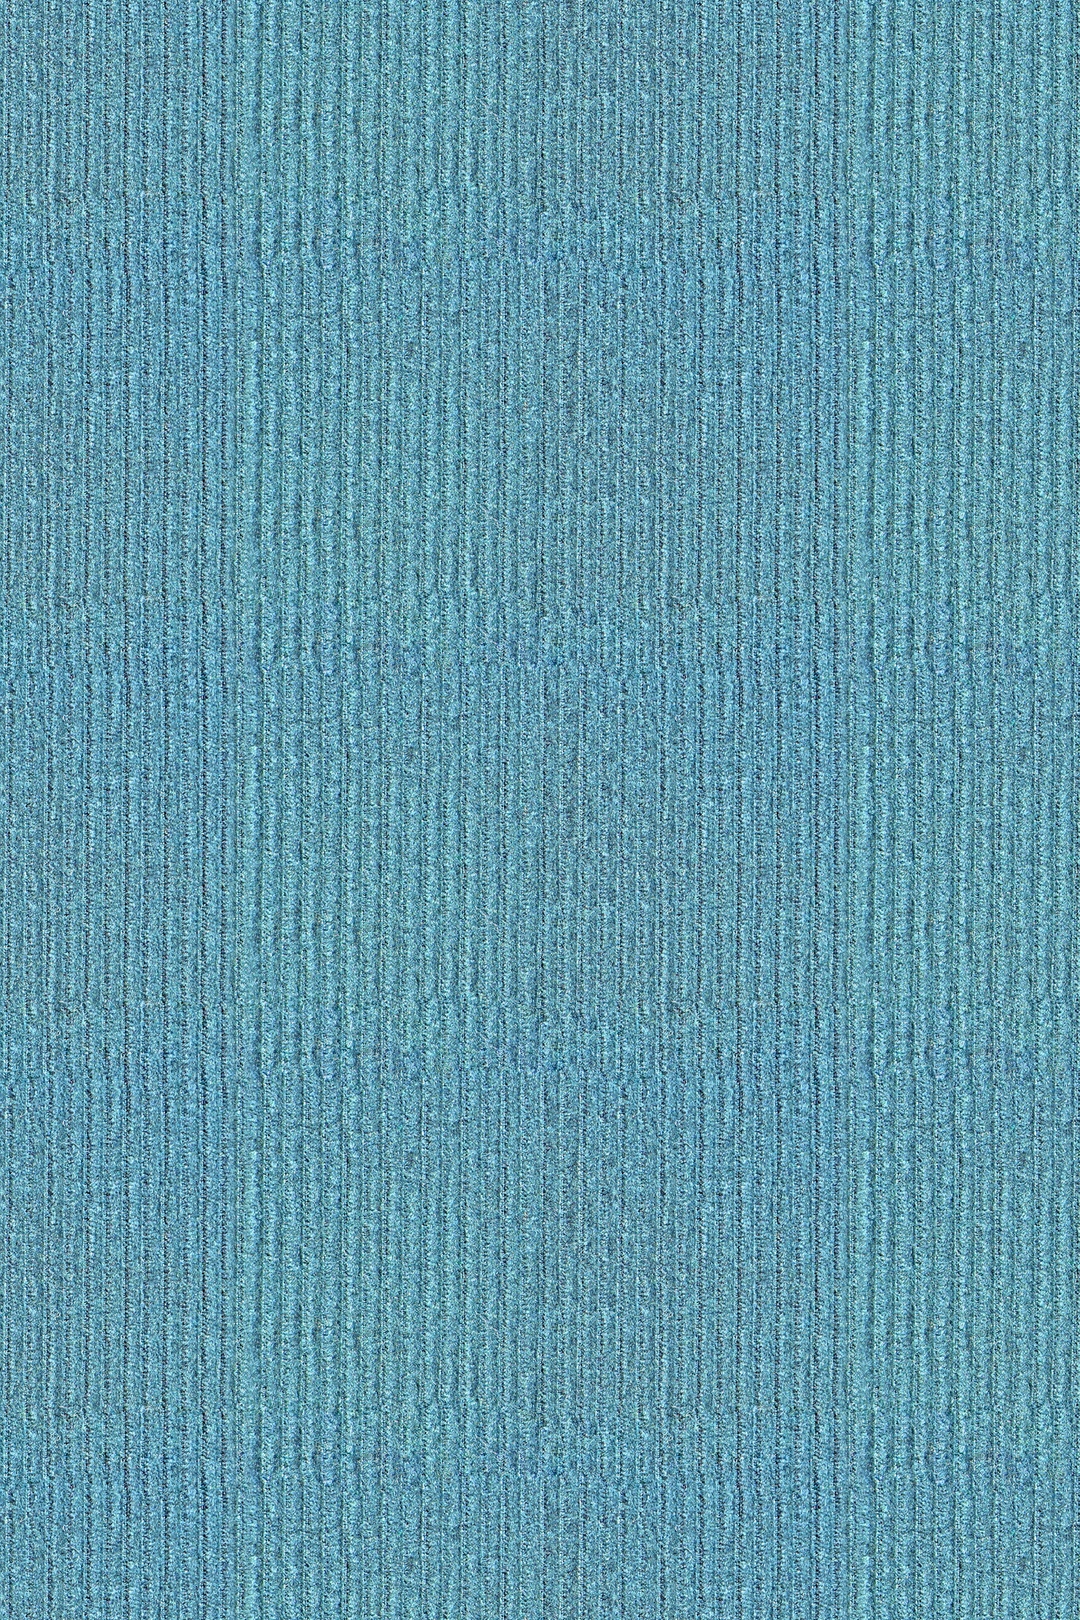 Image: Texture, water, color, stripe